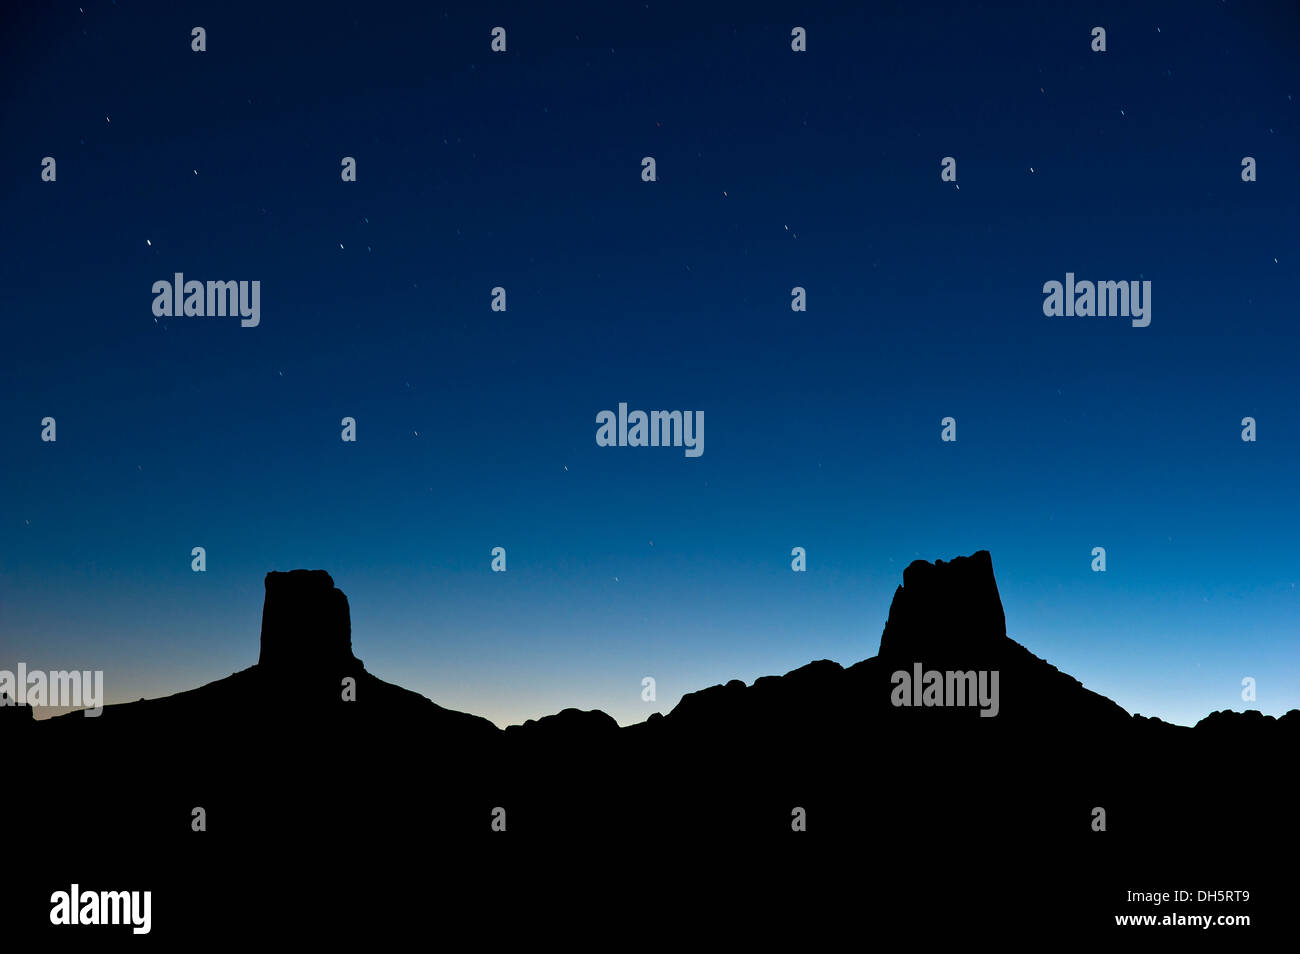 Starry sky above the imposing stone rock formations named Madame and Monsieur, Bab'n Ali, Jebel Sarhro or Little Atlas mountain Stock Photo